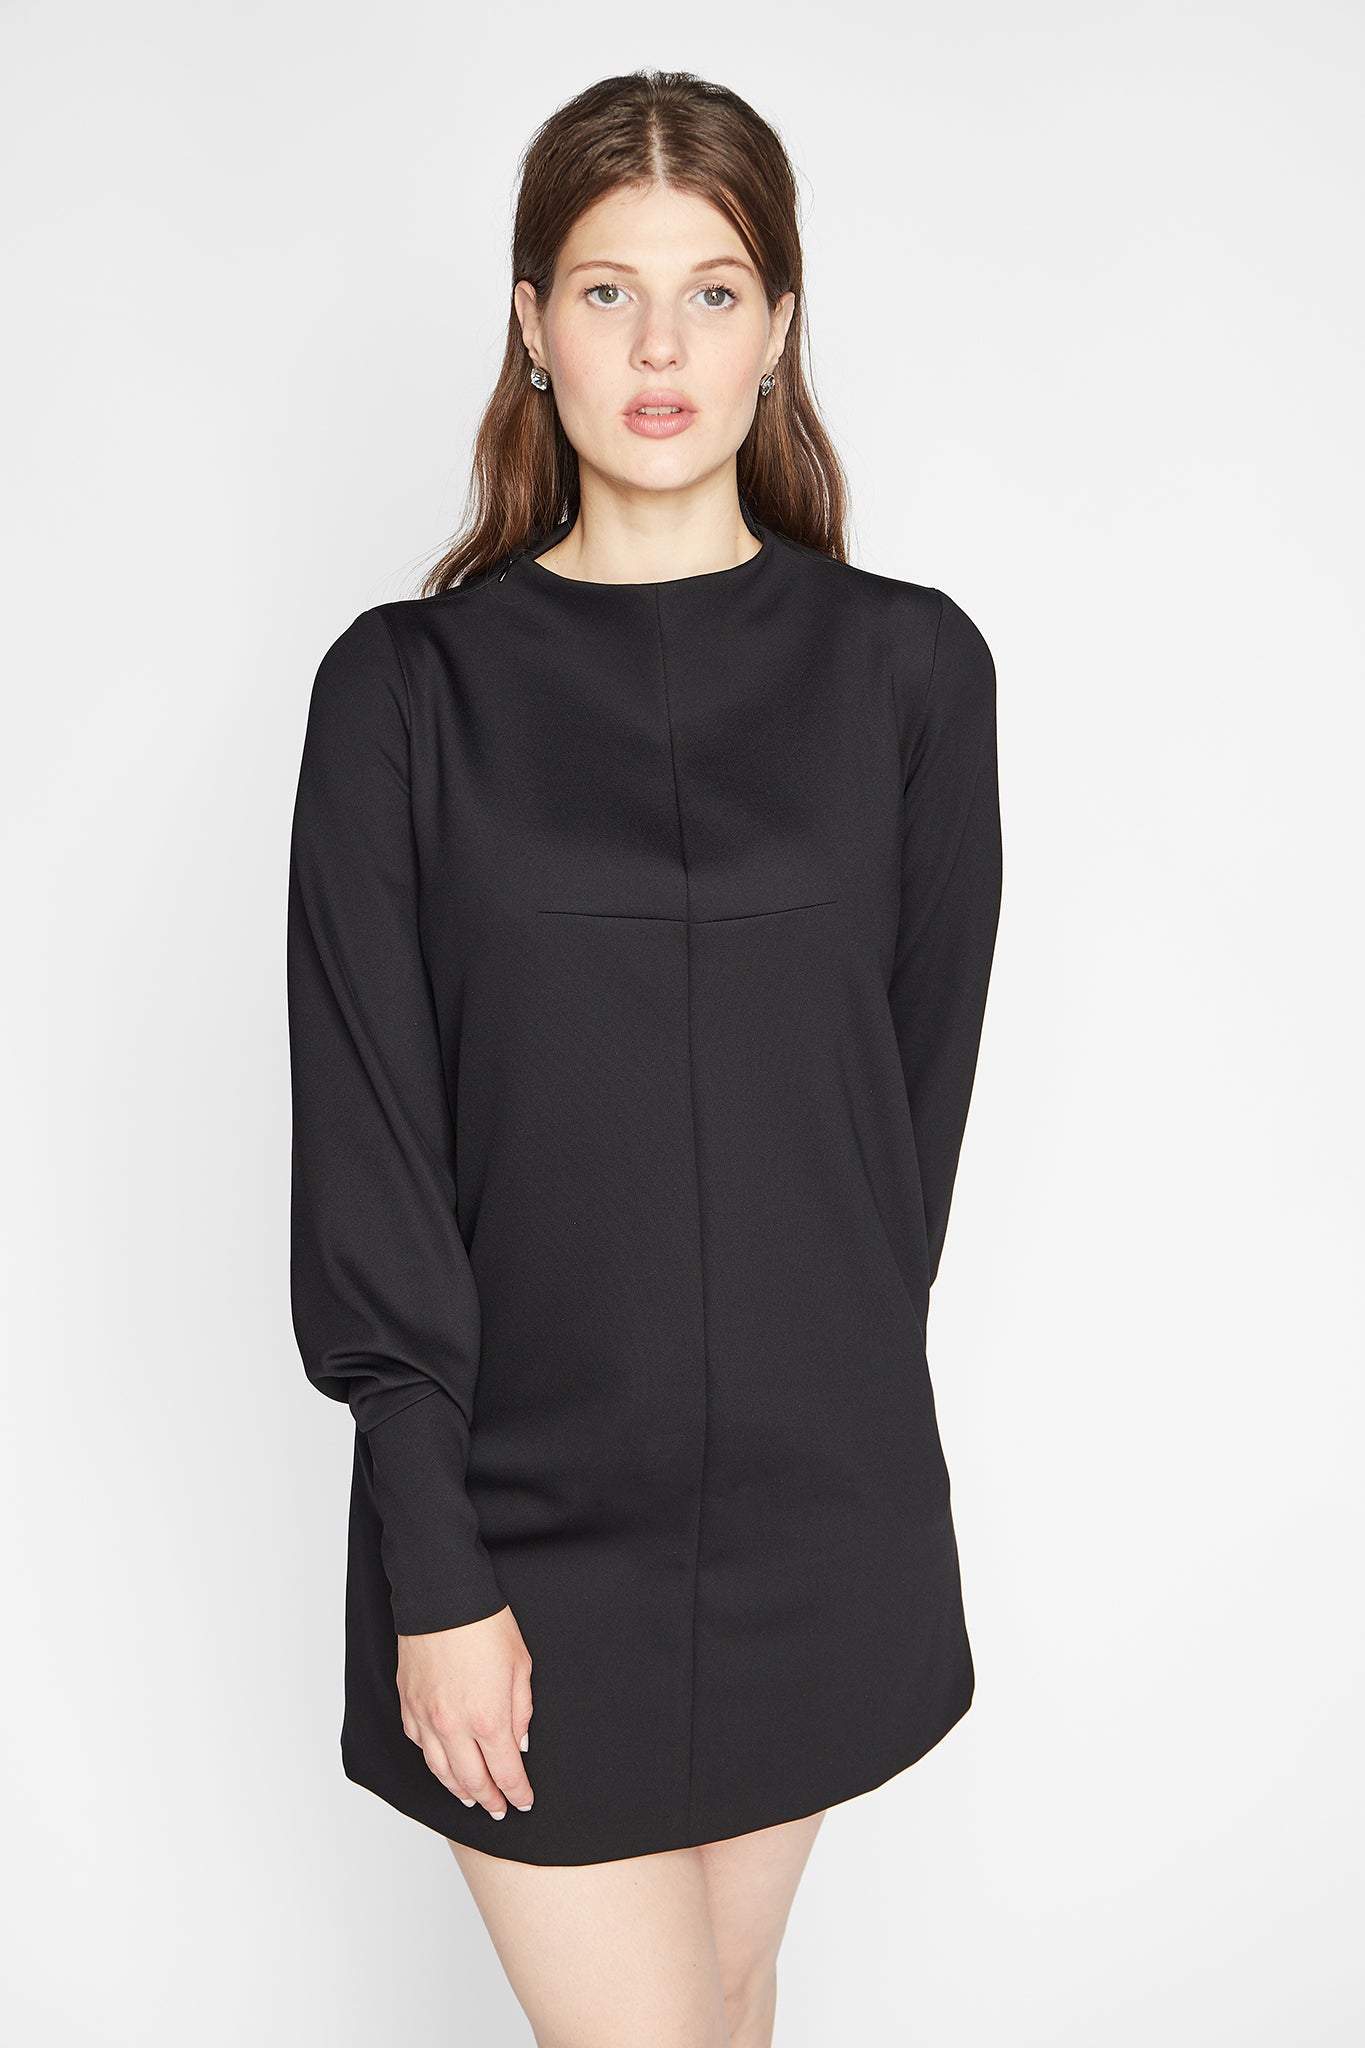 Woman wearing a long sleeve fuller bust mock neck shift dress with pockets in black stretch jersey designed by Miriam Baker.